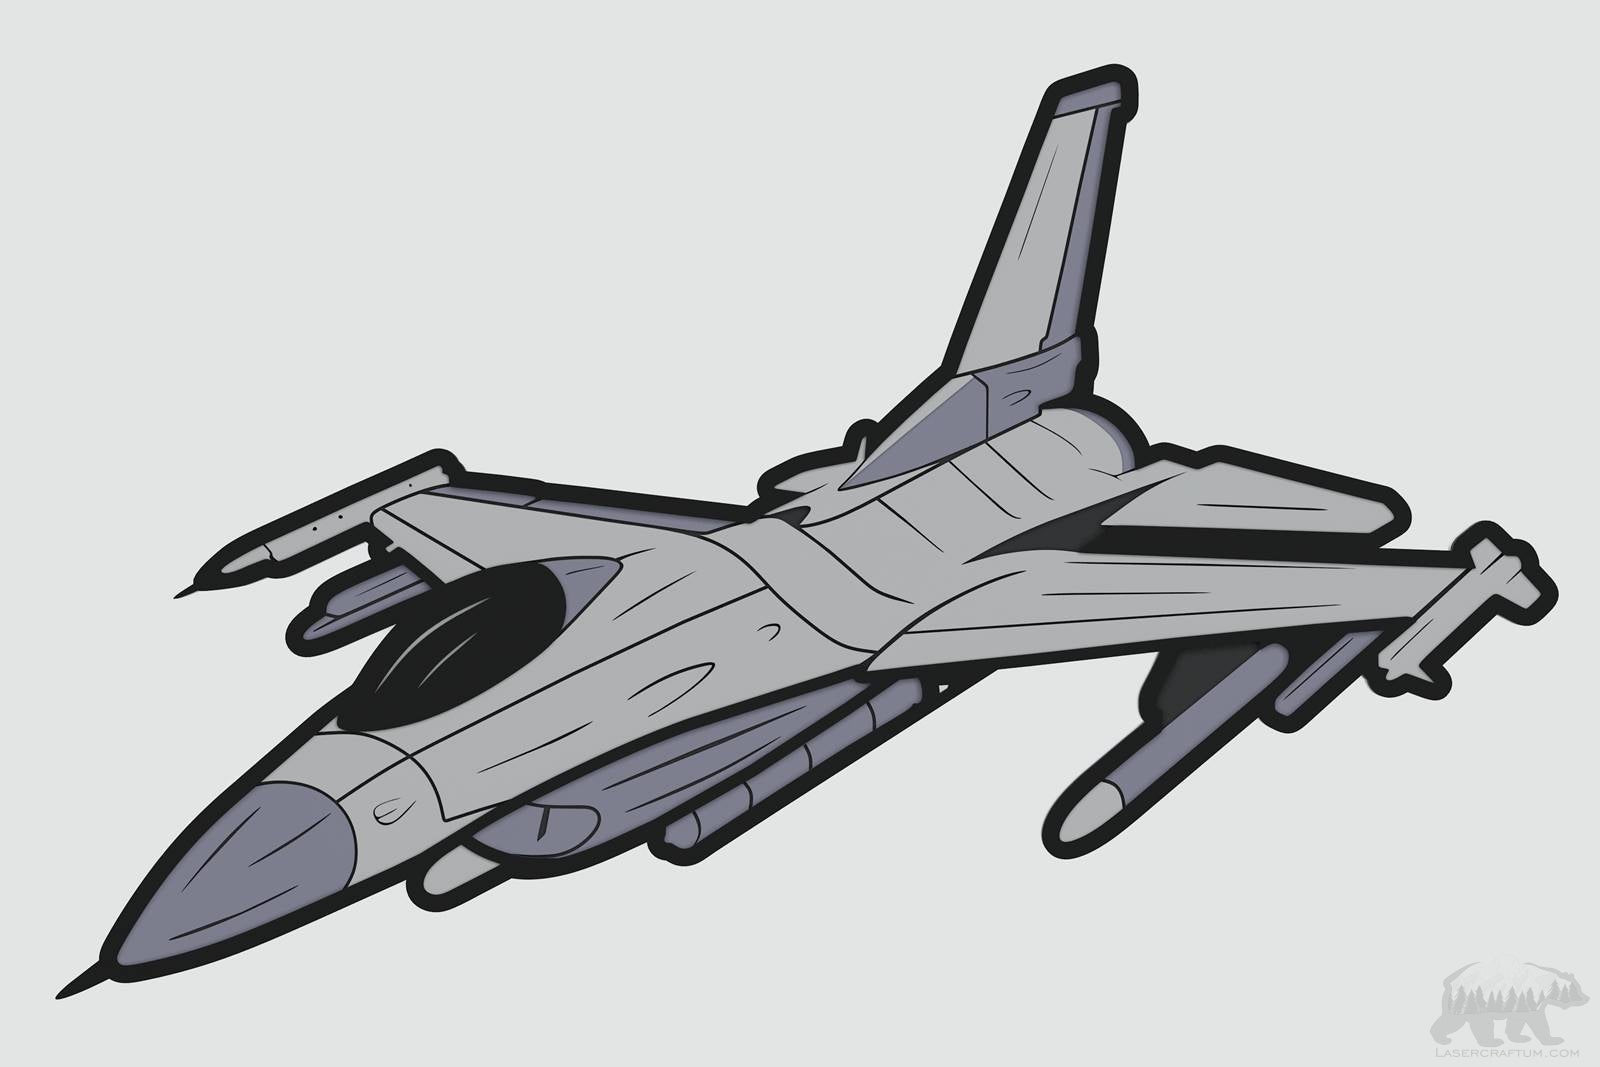 Jet Fighter Layered Design for cutting